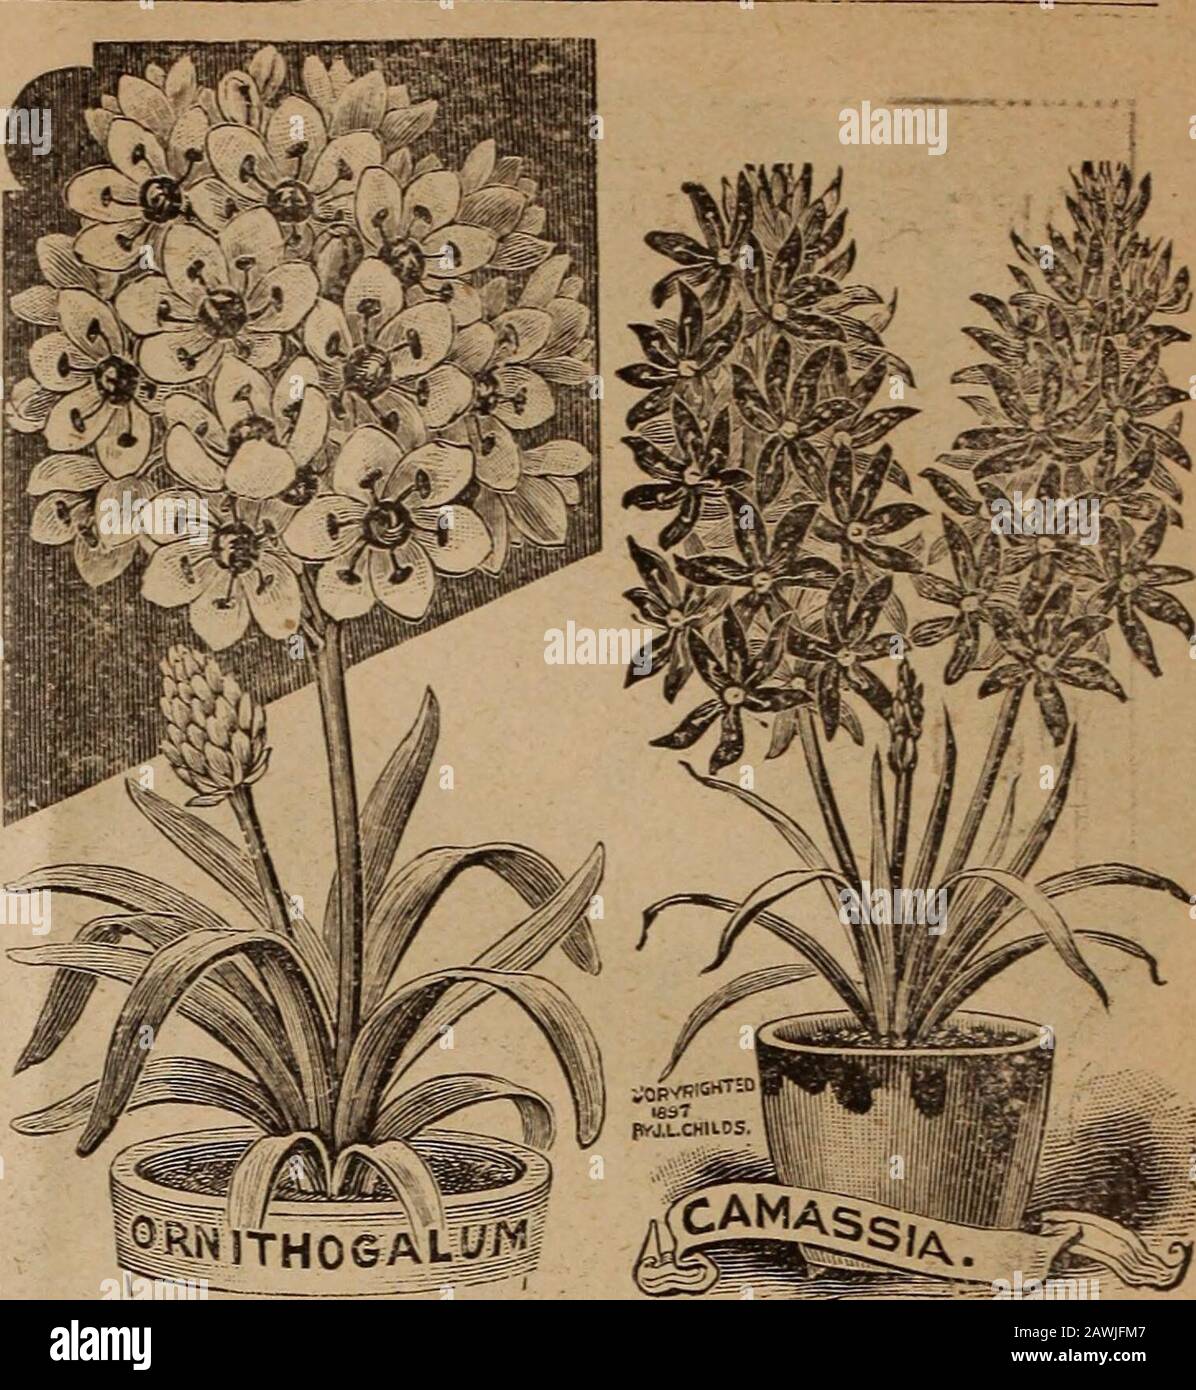 Childs' bulbs that bloom : bulbs that bloom plants that please berries that bear . olors and^ure to attract great attention. For pot culture in theiiouse thev give great satisfaction, being of easy cui-nre and free bloomers. Half a dozen bulbs may beplanted in a five-inch pot, and the display will be mag-nificent. For open ground culture give them winterprotection wtih leaves or straw. Mixed, 3 for 1.&gt;c:12 for 00c. TRITONIA CROCATA The most brilliant winter-flowering bulb in cultiva-tion. Treated like a Freesia, it produces spikes of large,well-opened flowers of the most intense cardinal co Stock Photo